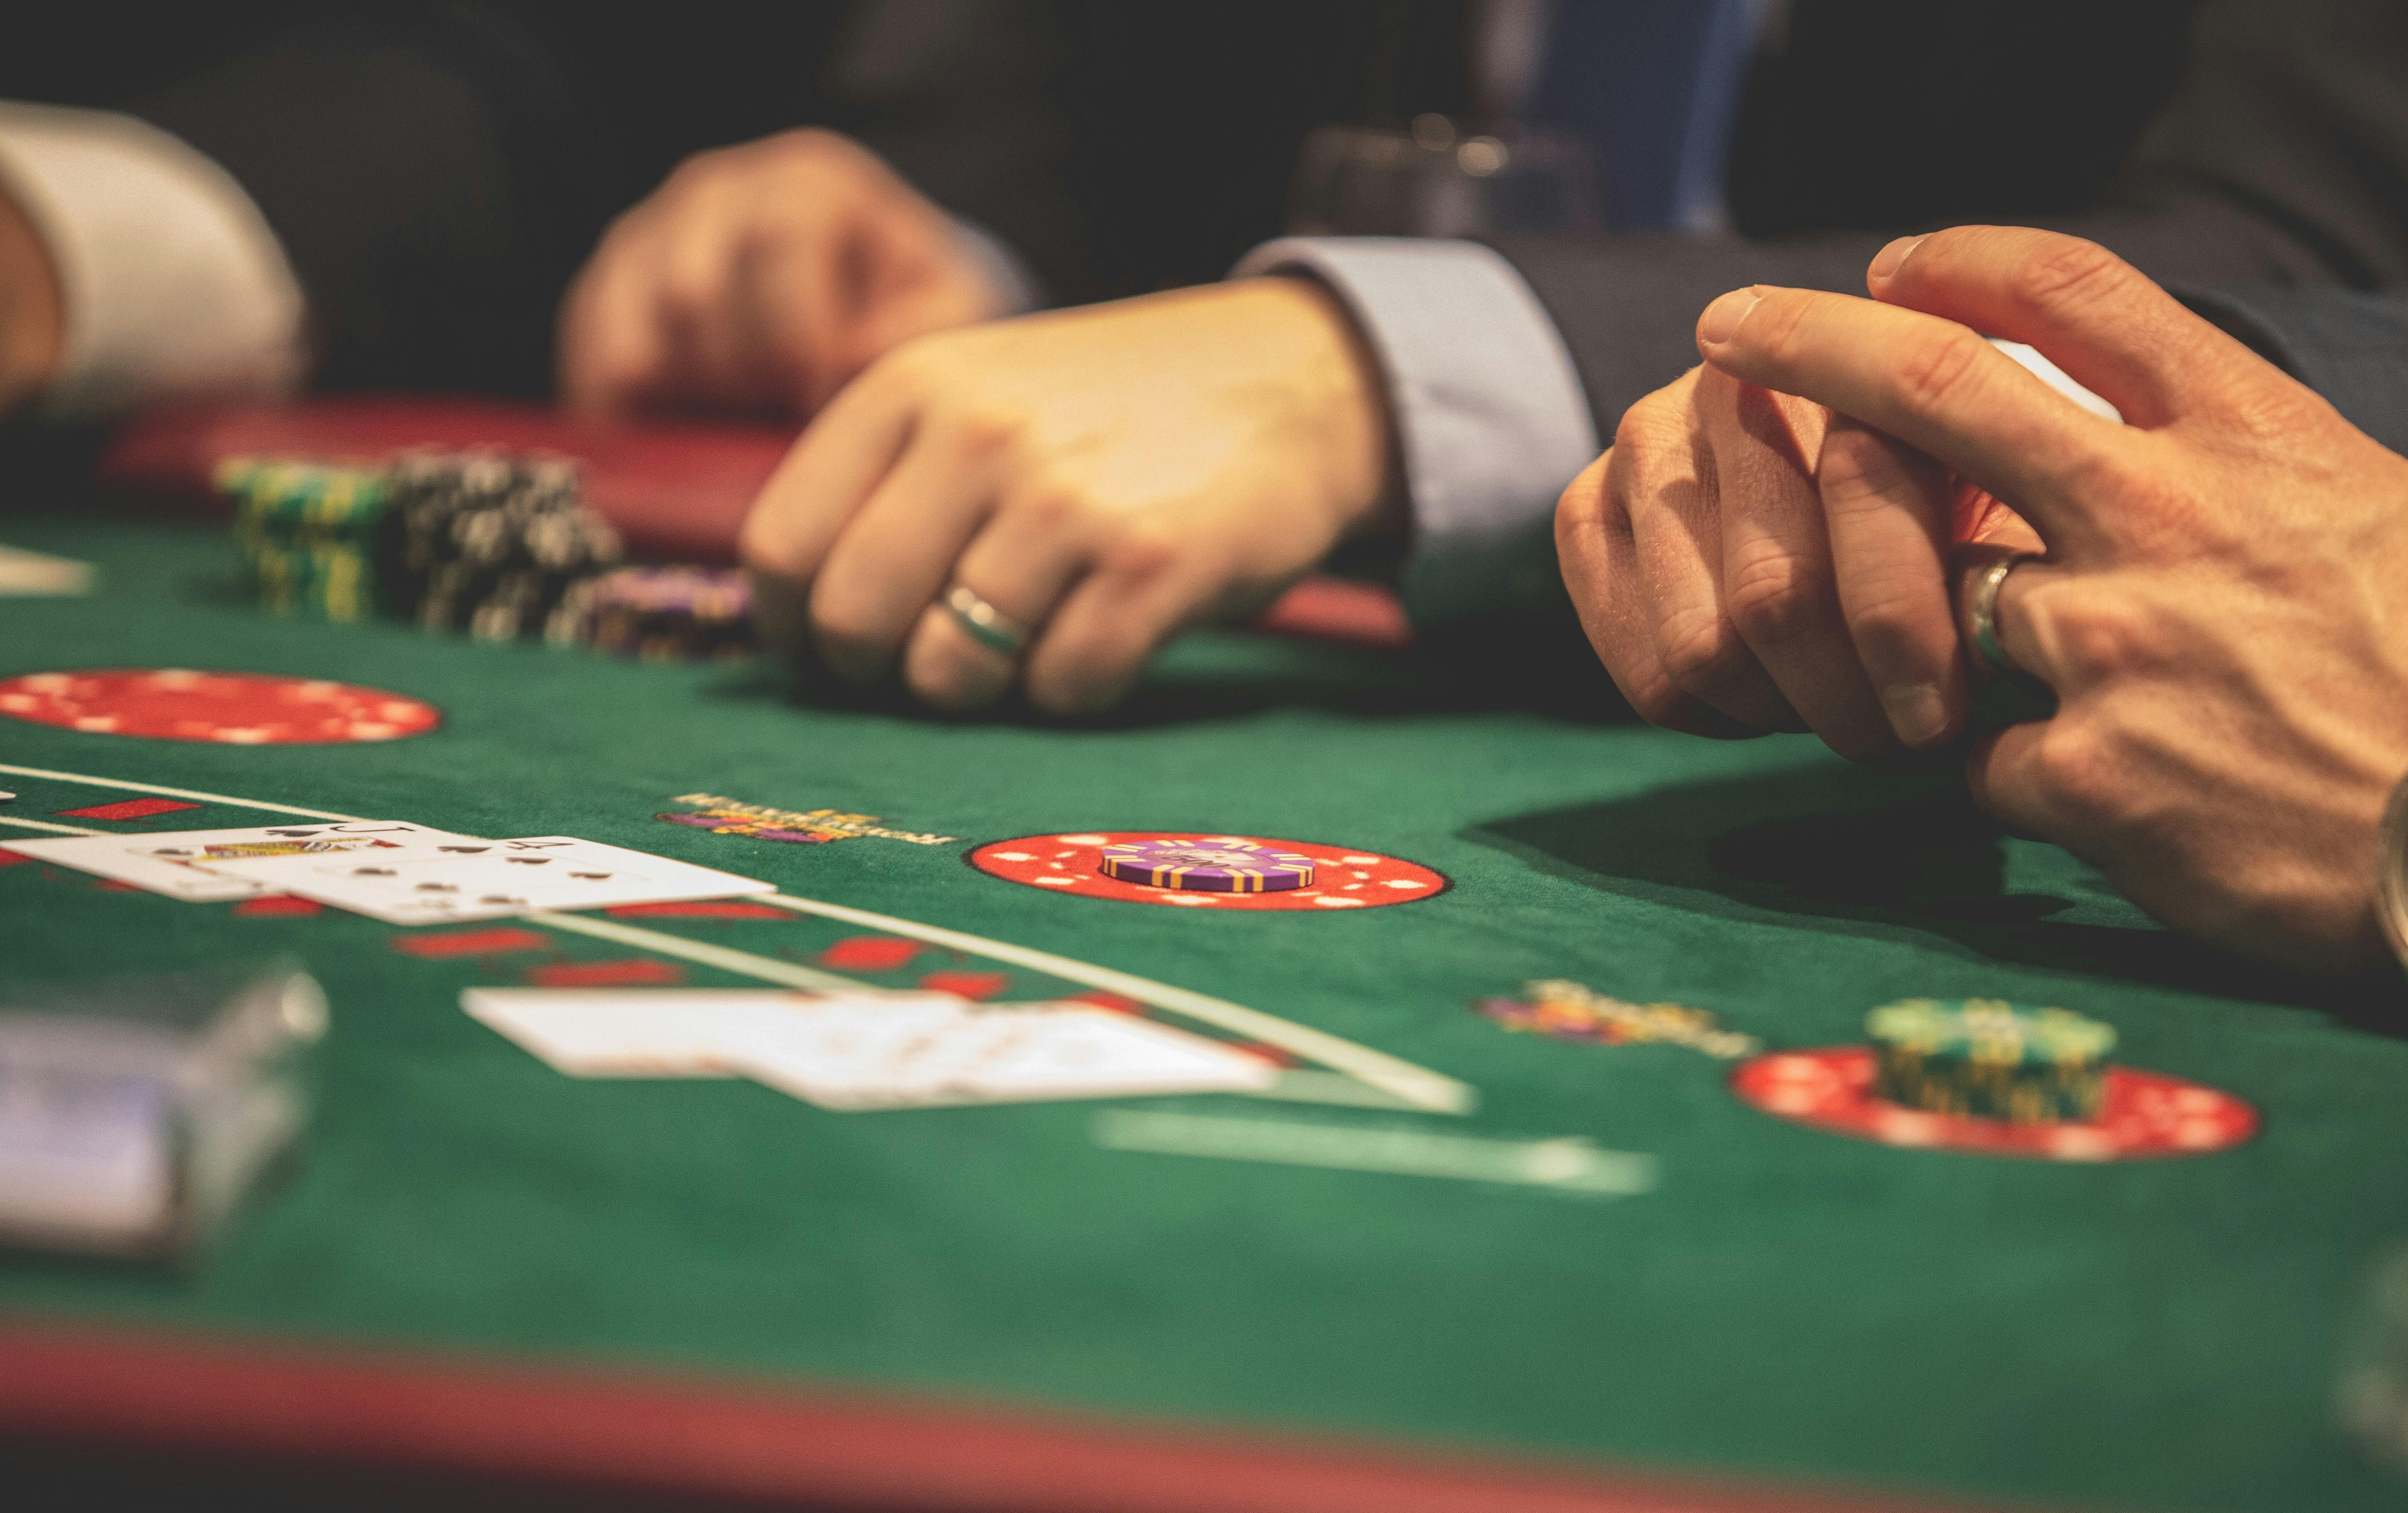 People gambling. For illustration purposes only | Source: Pexels